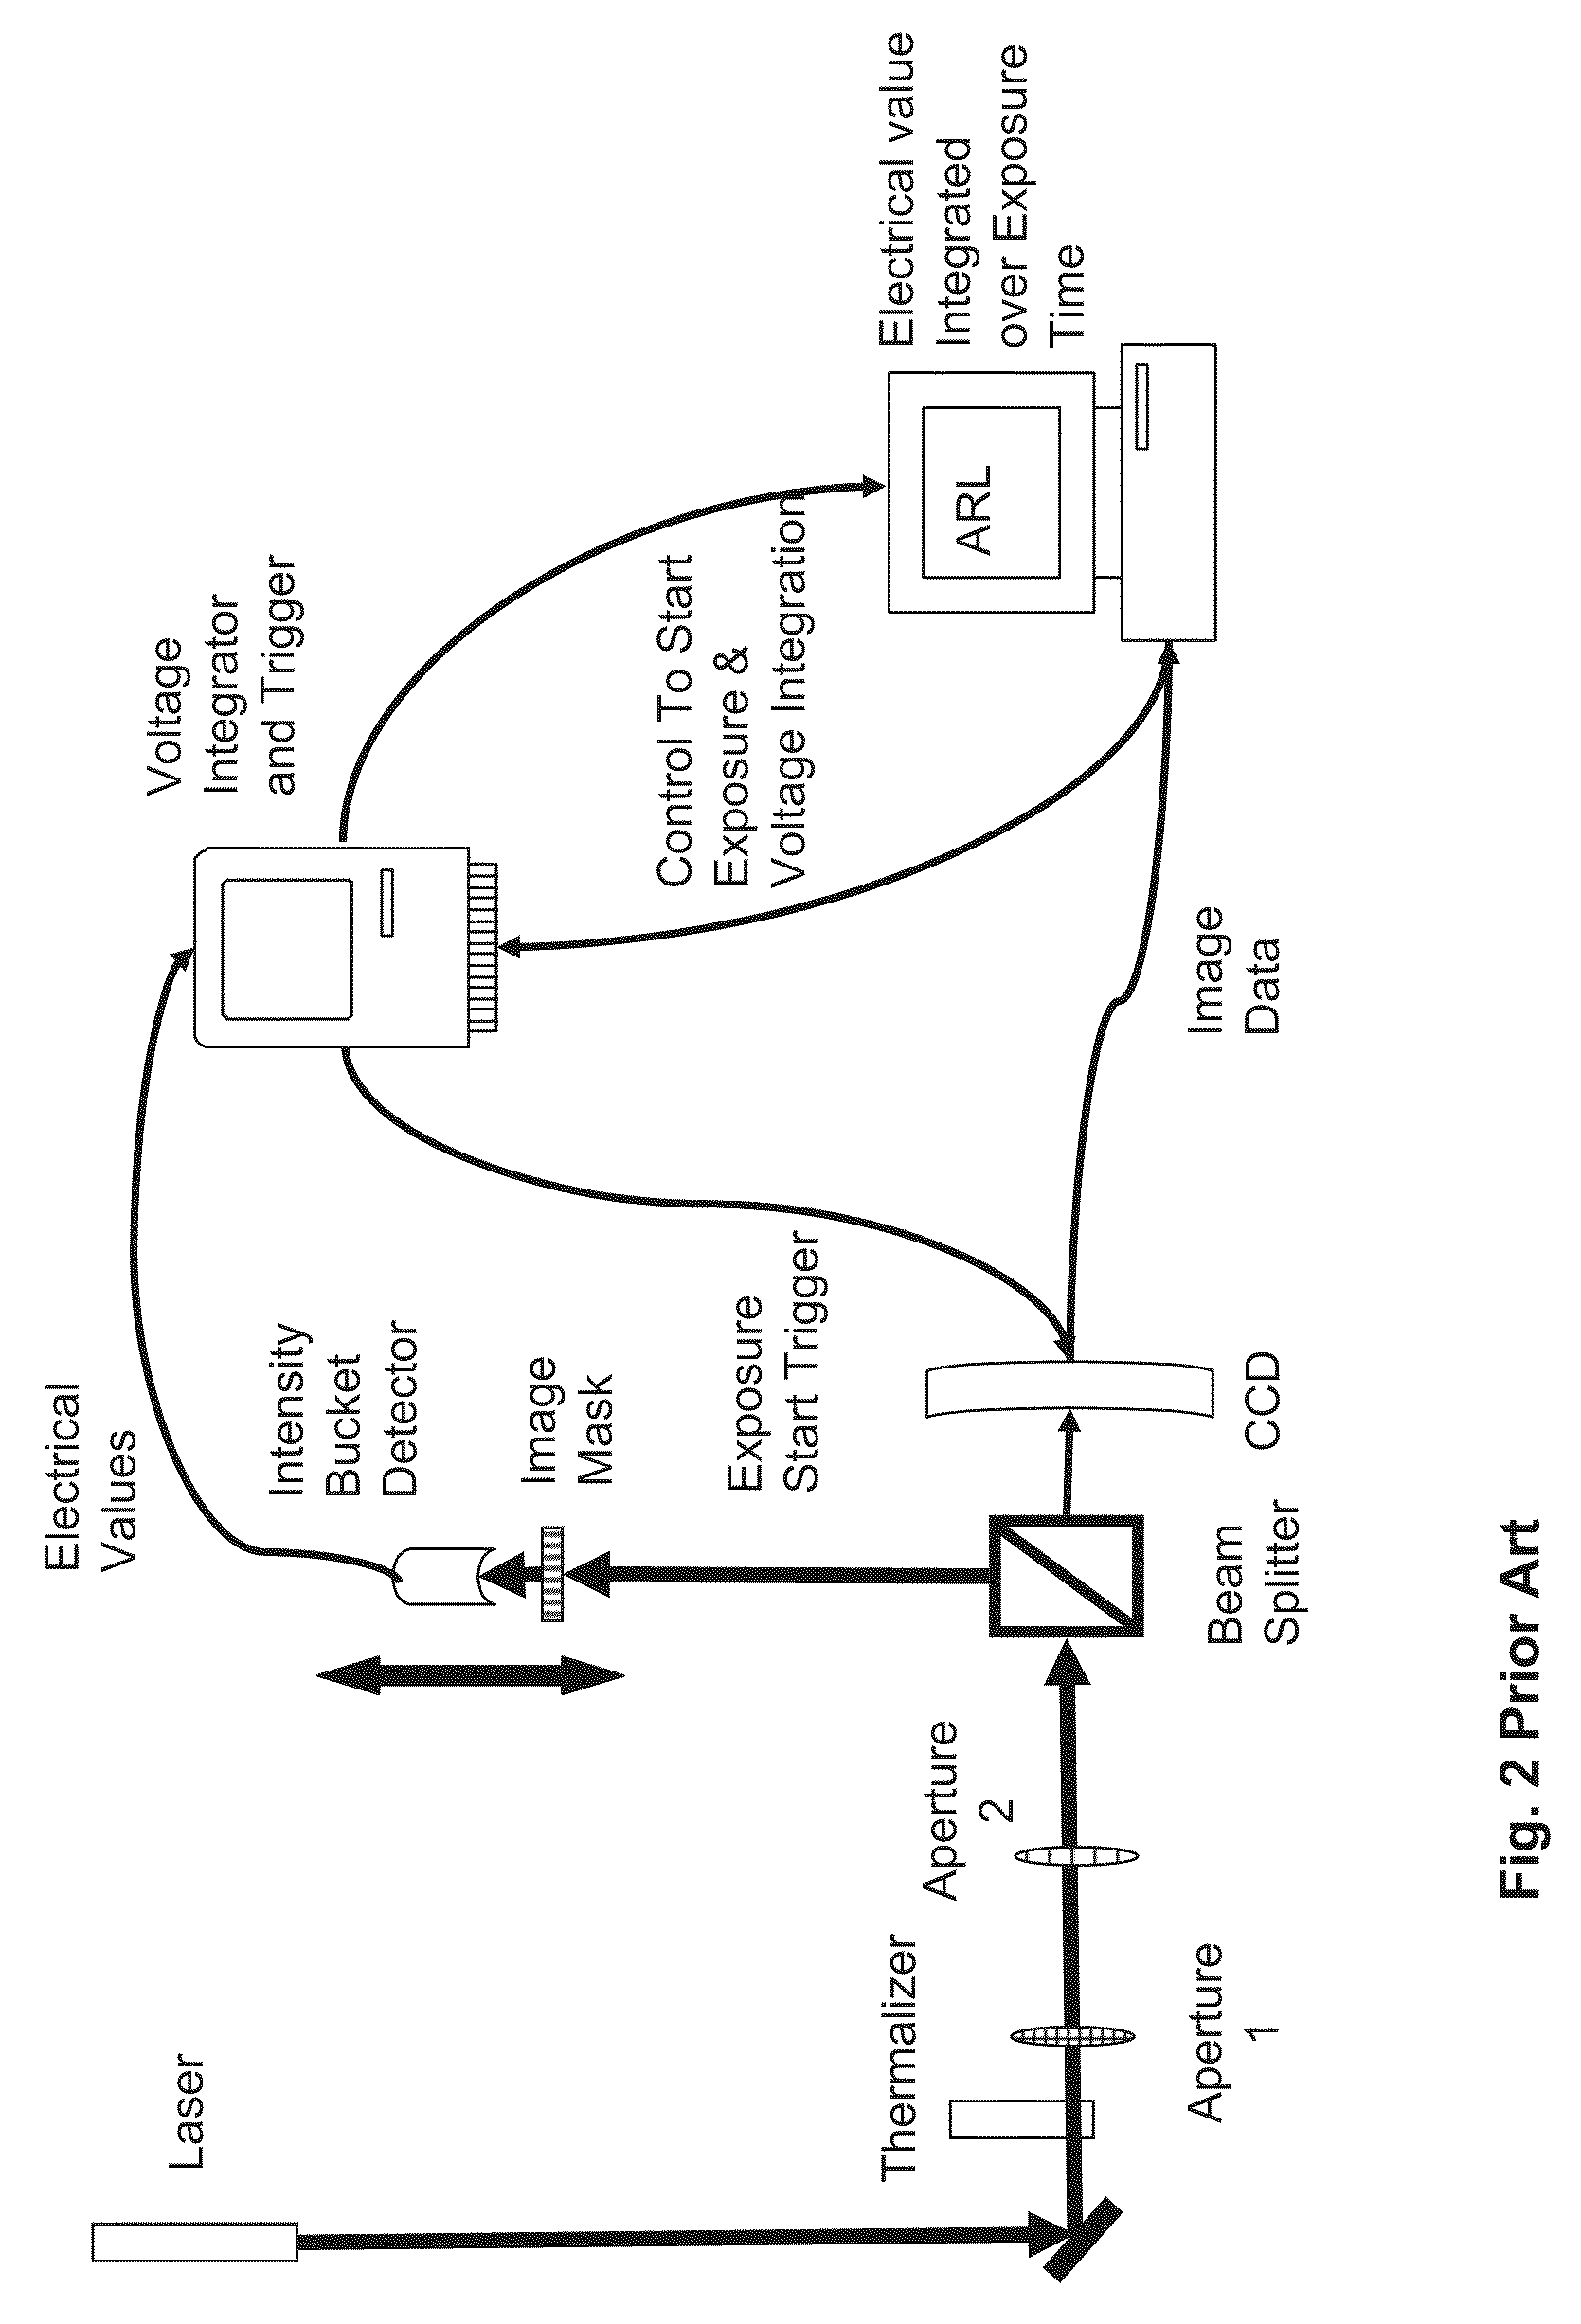 Method and system for creating an image using quantum properties of light based upon spatial information from a second light beam which does not illuminate the subject